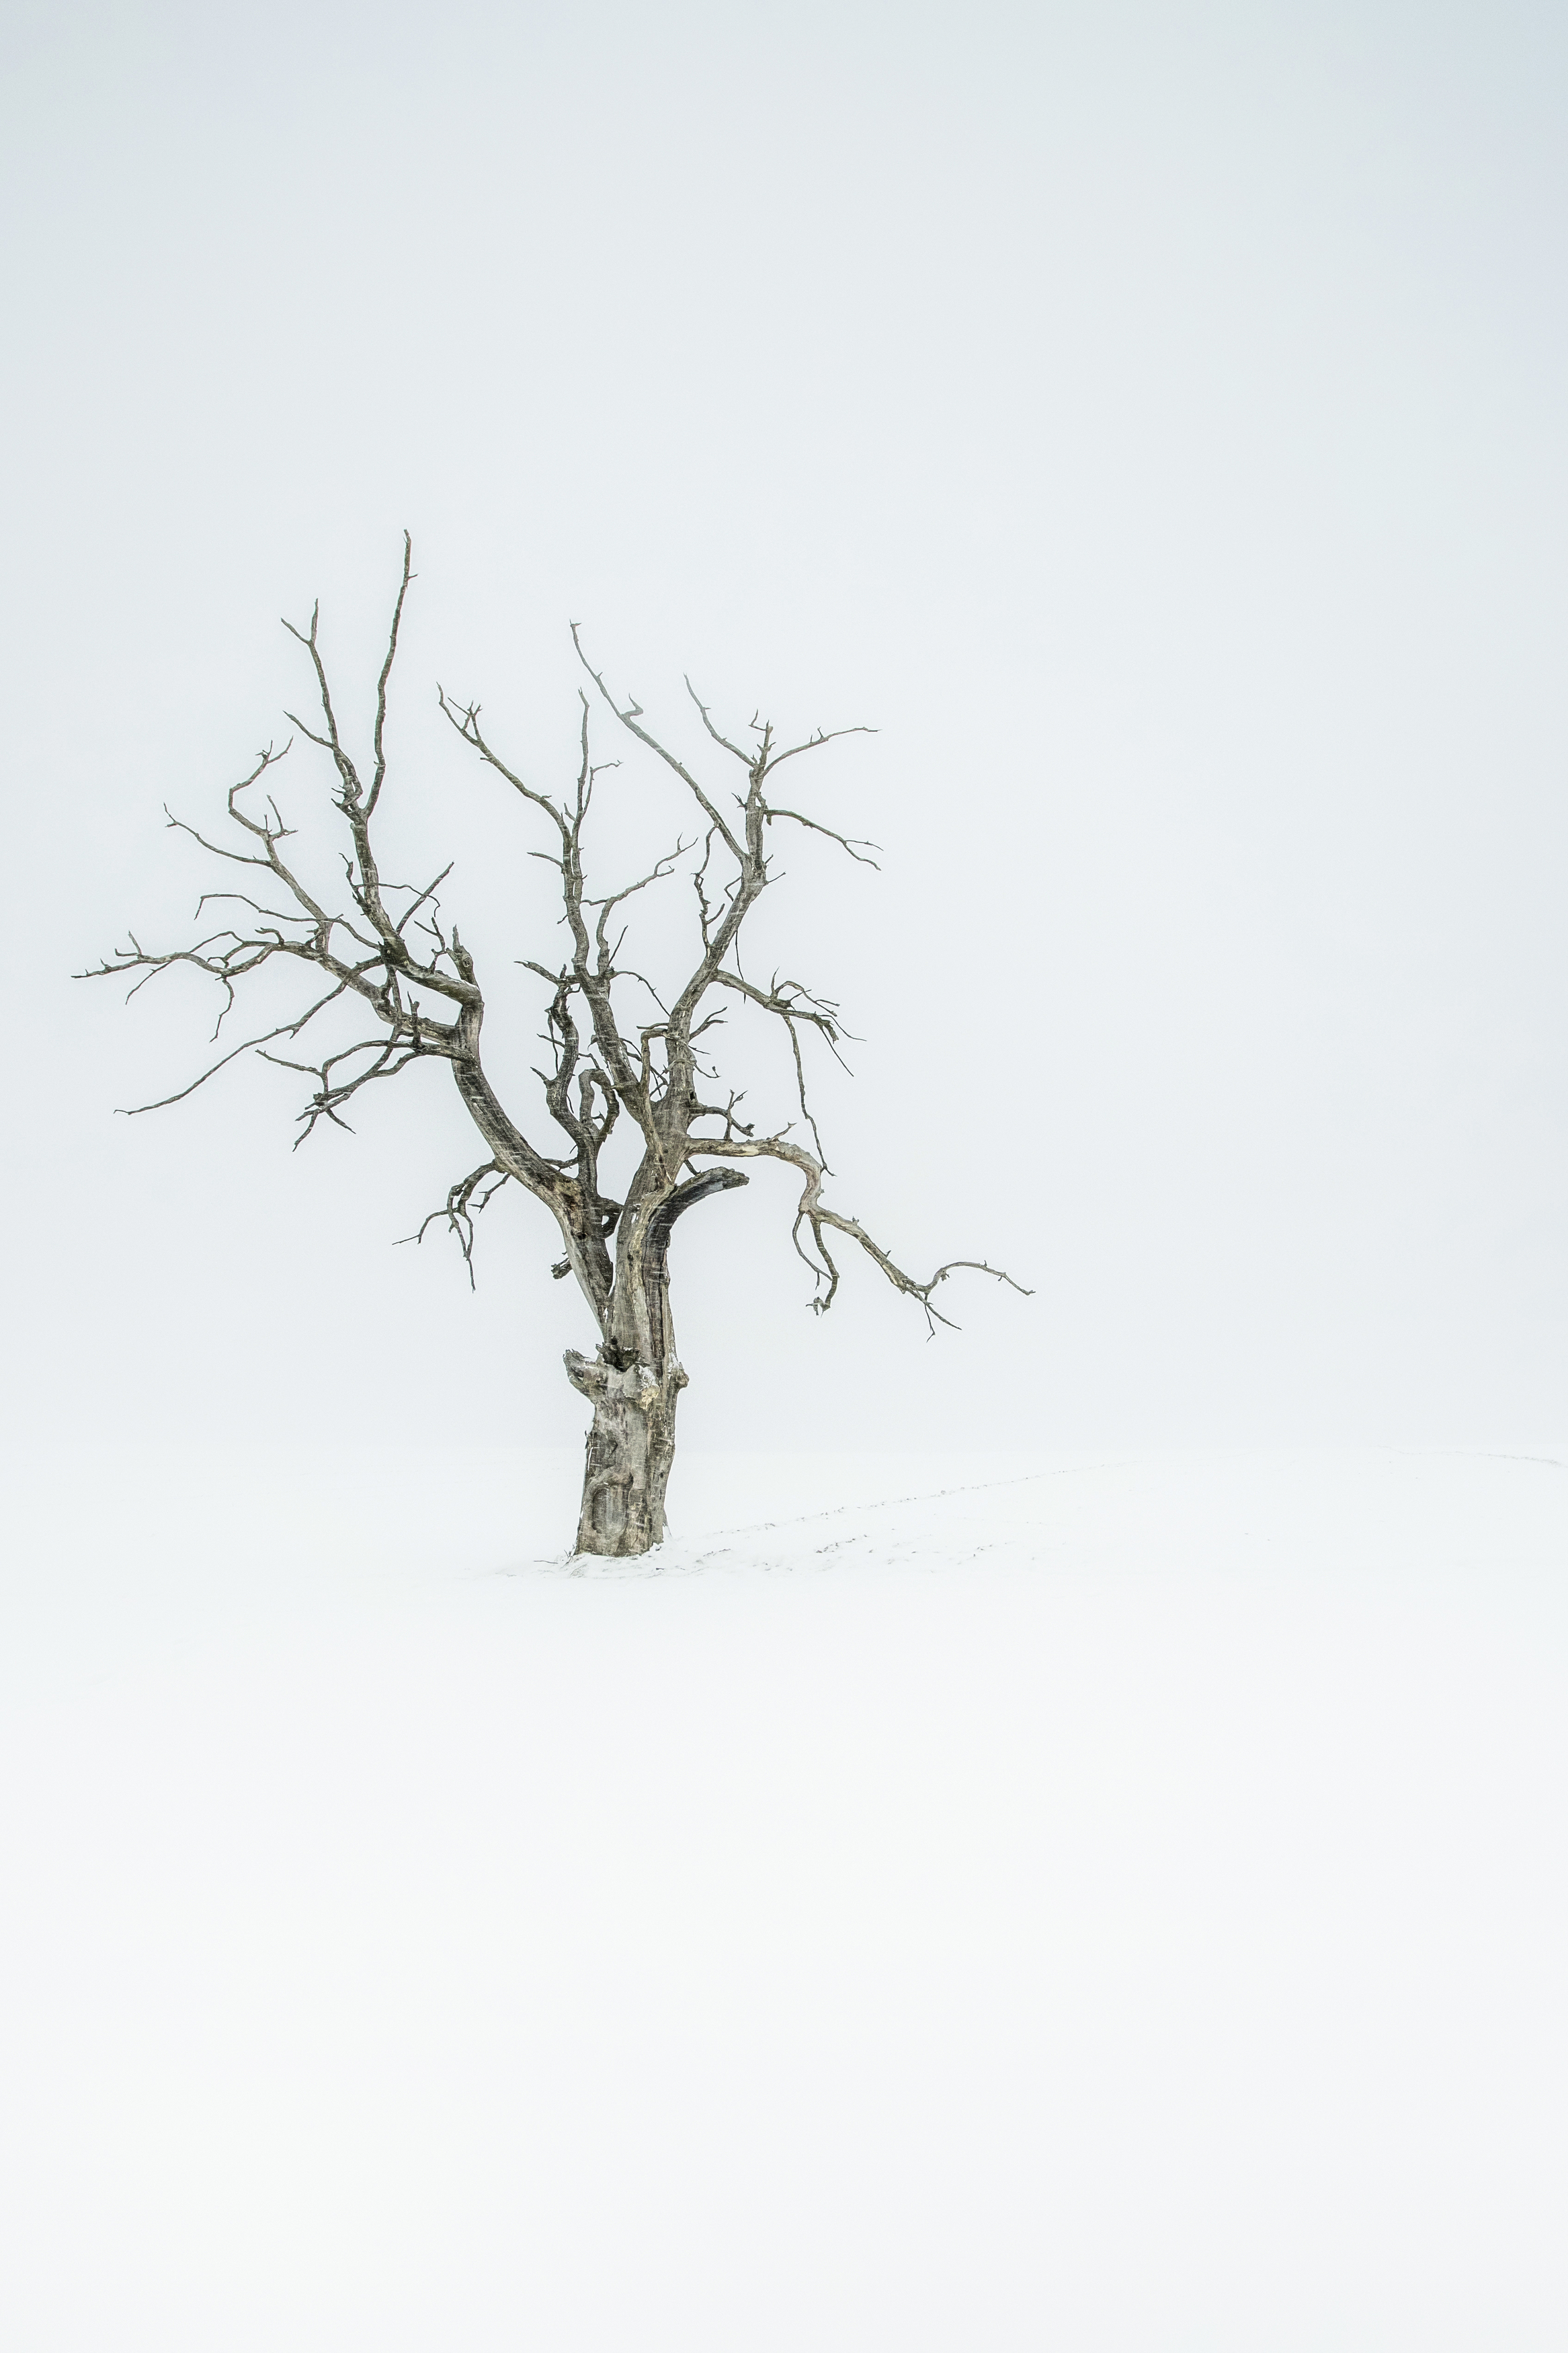 Vertical, Tree, Snow, Winter, Cold, Nature, Plant, Minimal, Landscapes, Poland, Damian Cyfka